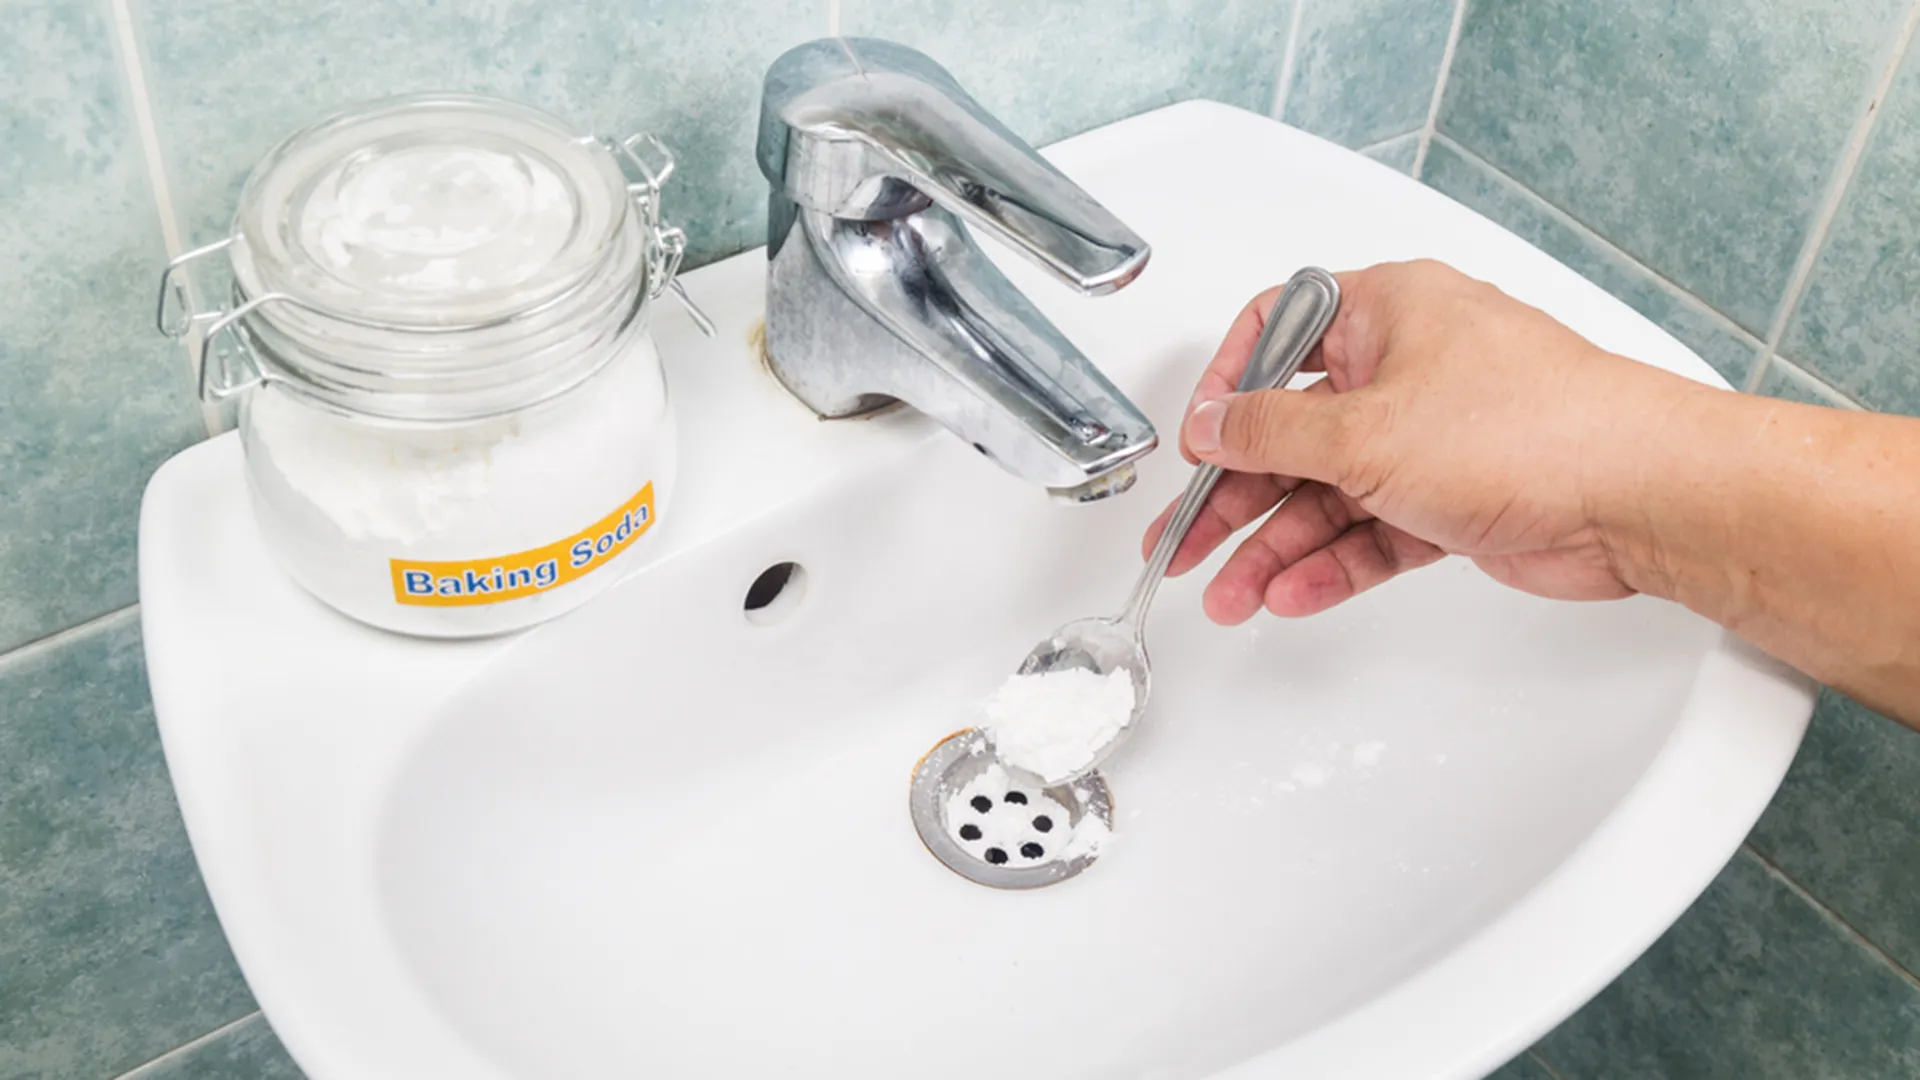 How to Use Vinegar and Baking Soda to Unclog a Drain